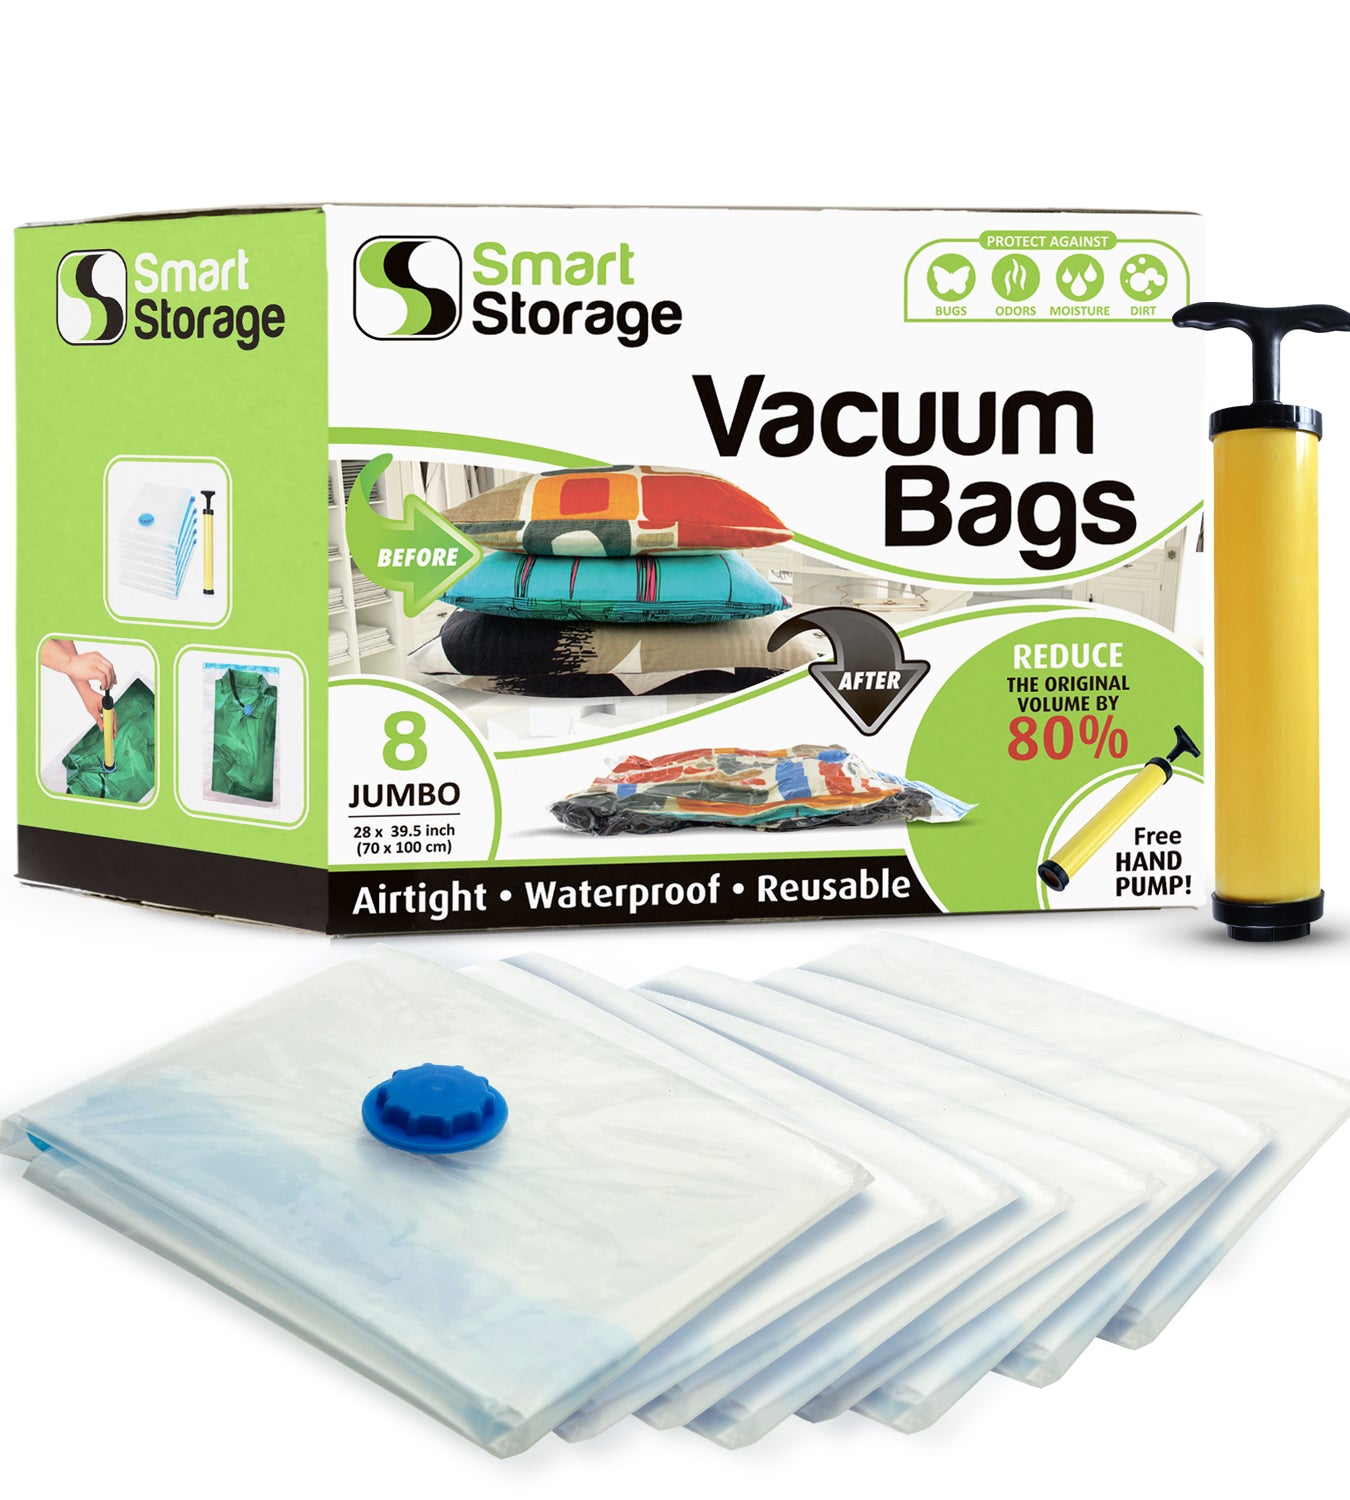 Jumbo Vacuum Storage Bags - Free Up 80% Space For Clothes, Bedding